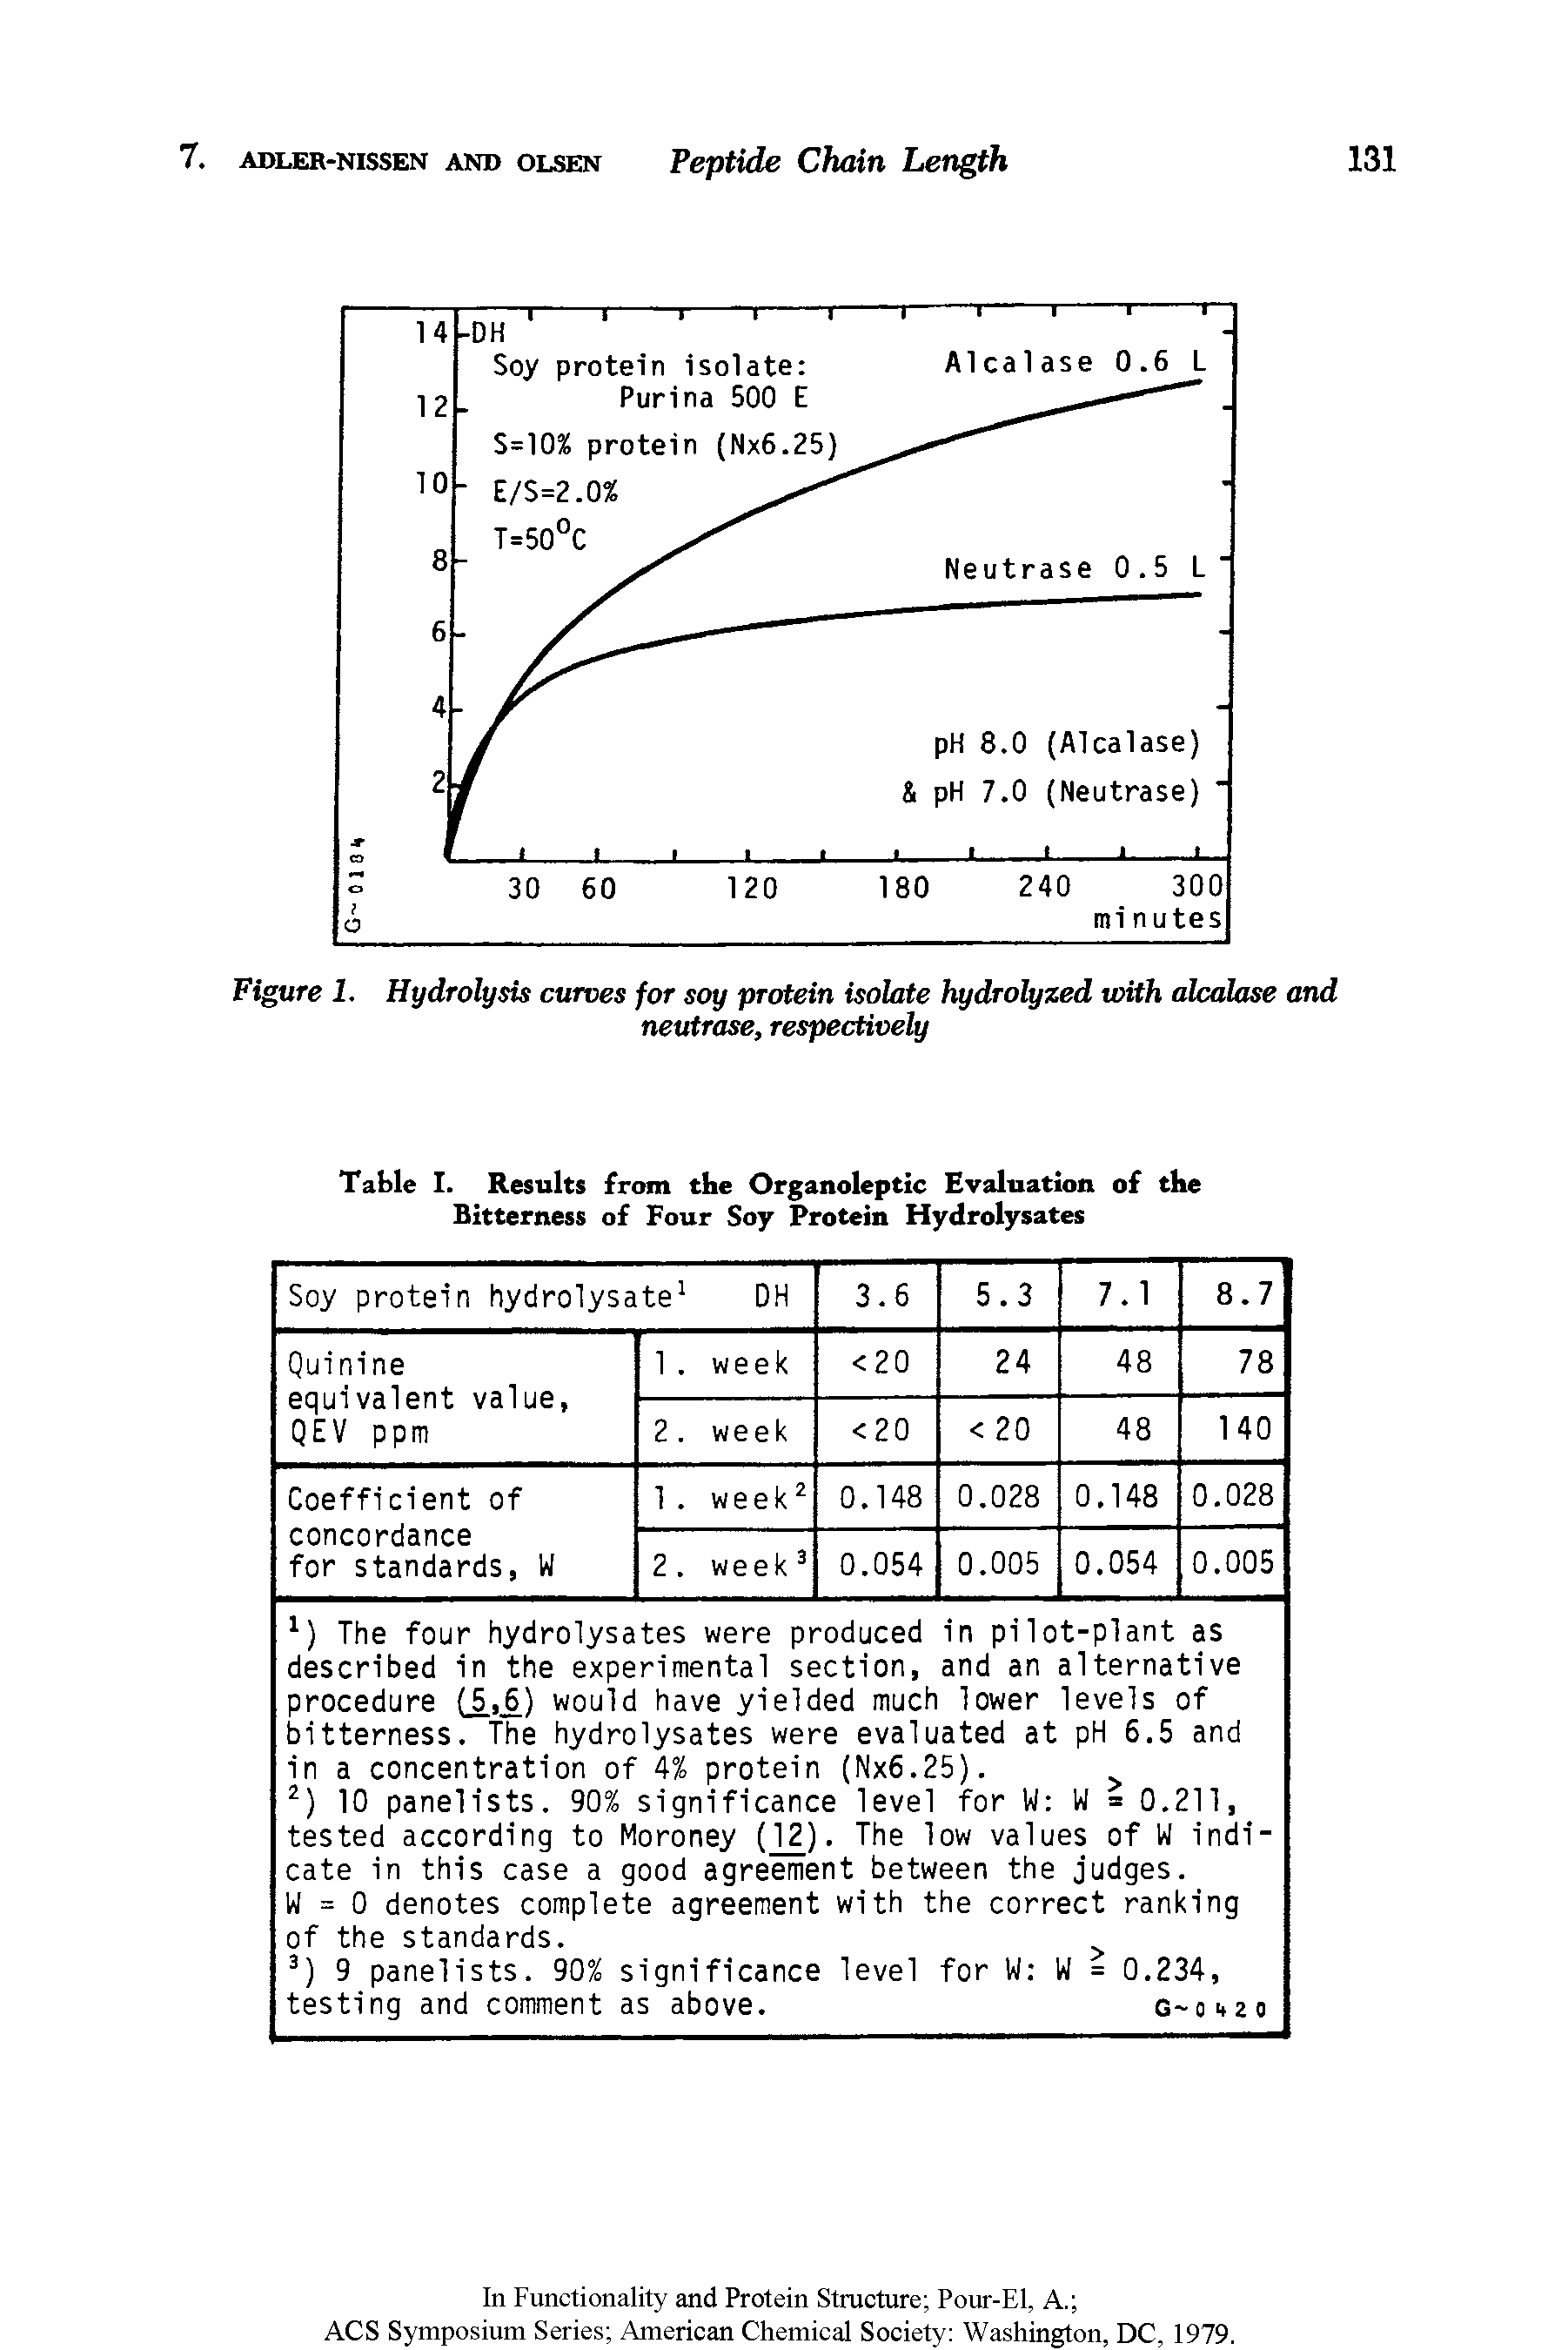 Table I. Results from the Organoleptic Evaluation of the Bitterness of Four Soy Protein Hydrolysates...